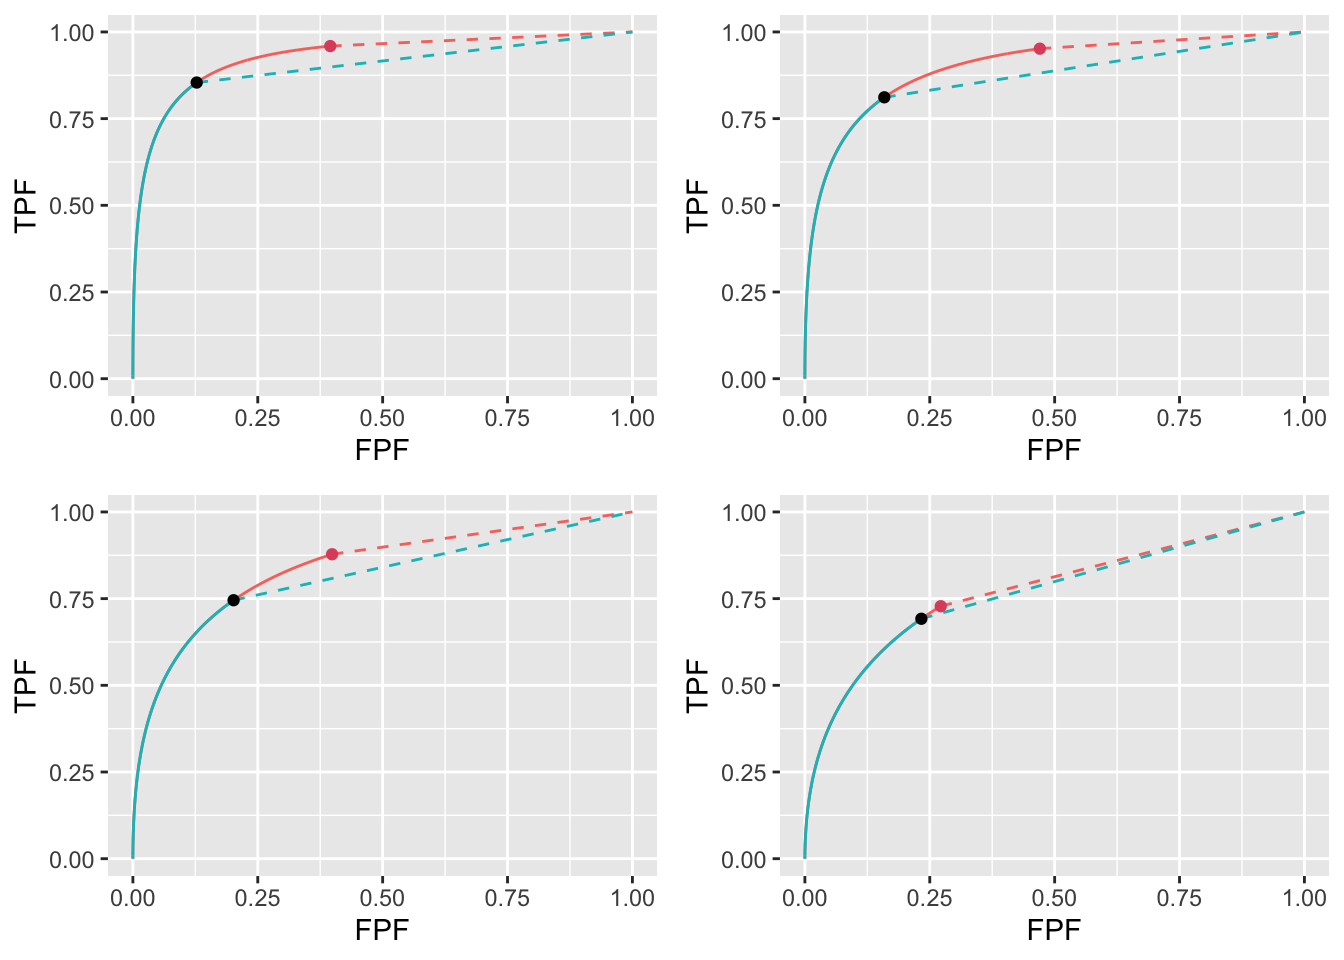 ROC plots for the two optimization methods: the "solid-green solid-red dashed-red" curve corresponds to $ ext{wAFROC}_    ext{AUC}$ optimization and the "solid-green dashed-green" curve corresponds to Youden-index optimization. The $\text{wAFROC}_\text{AUC}$ optimizations yield greater performance than Youden-index optimizations and the difference decreases with increasing $\lambda$.